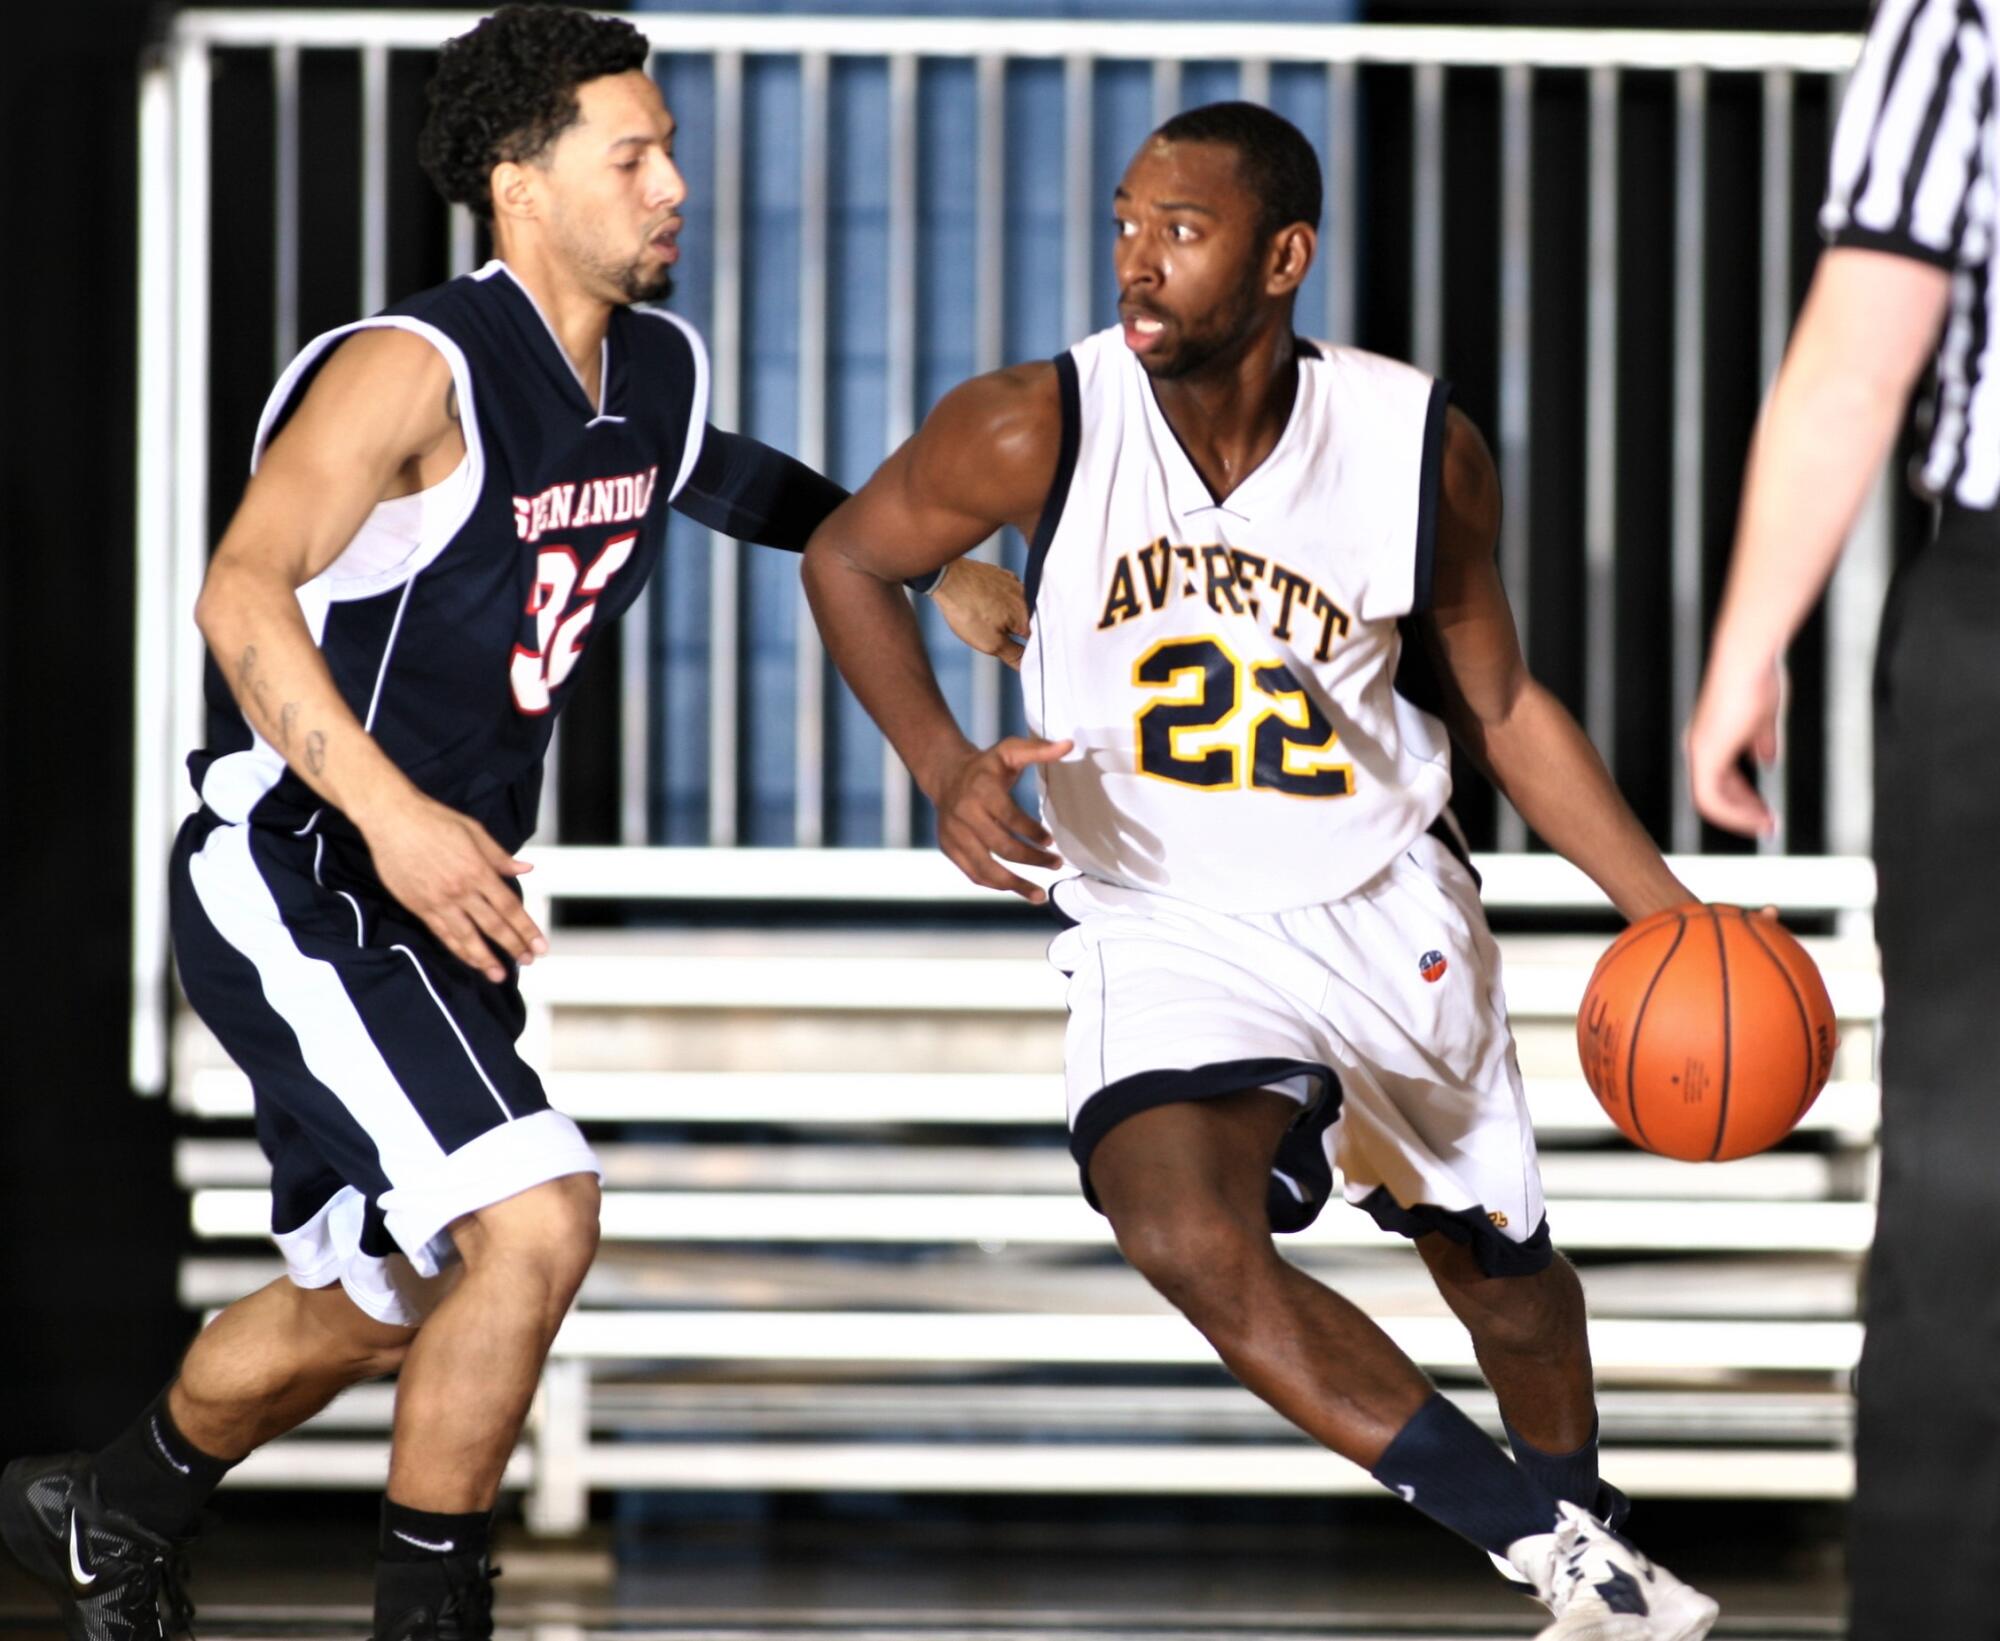 Justin Pierce, while playing for Averett University, drives against an opponent.